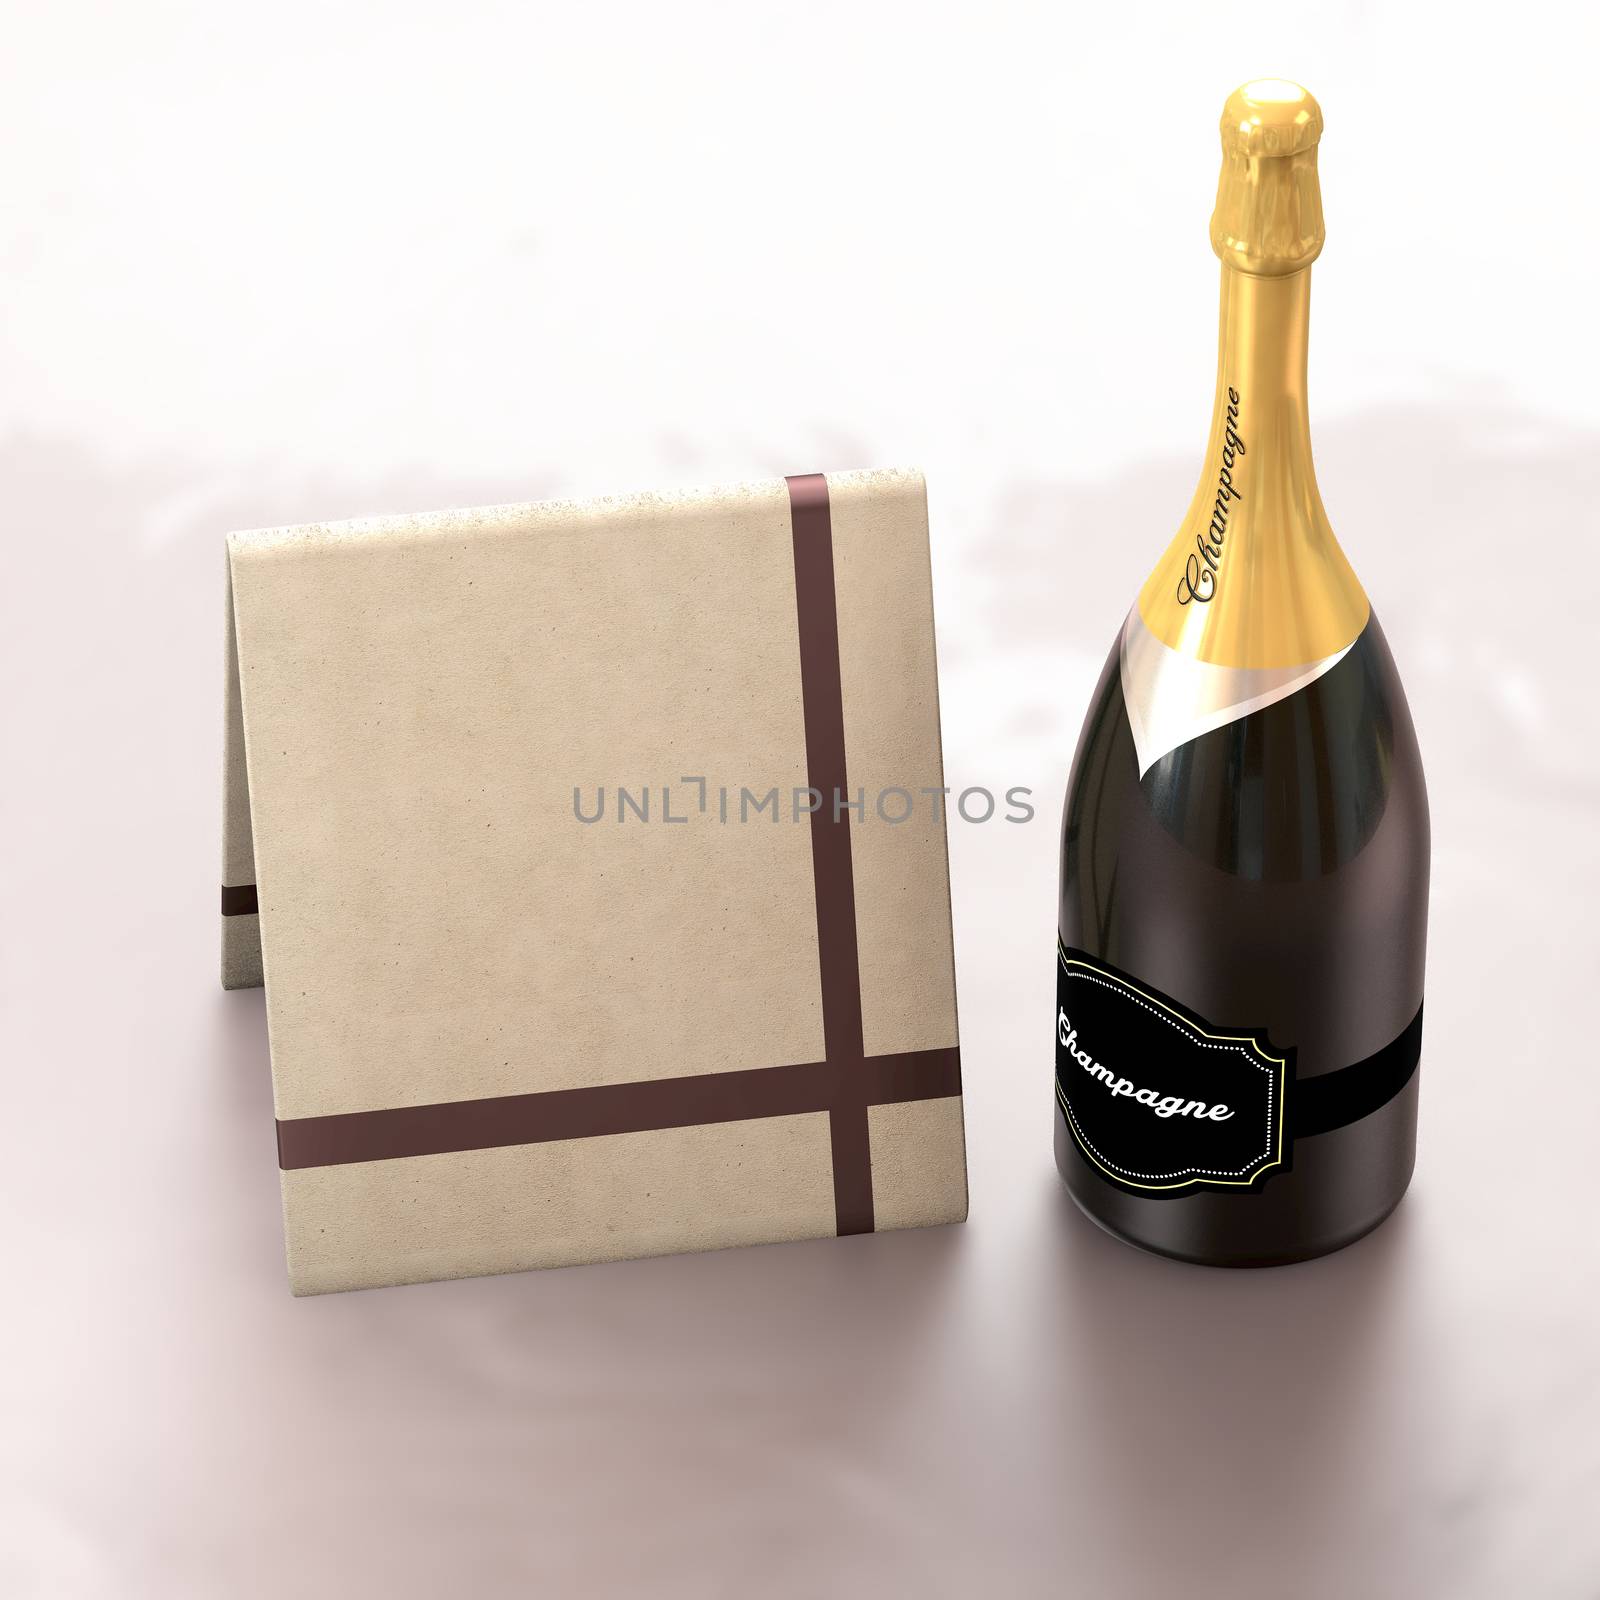 Greeting card with copy left and champagne. by ytjo